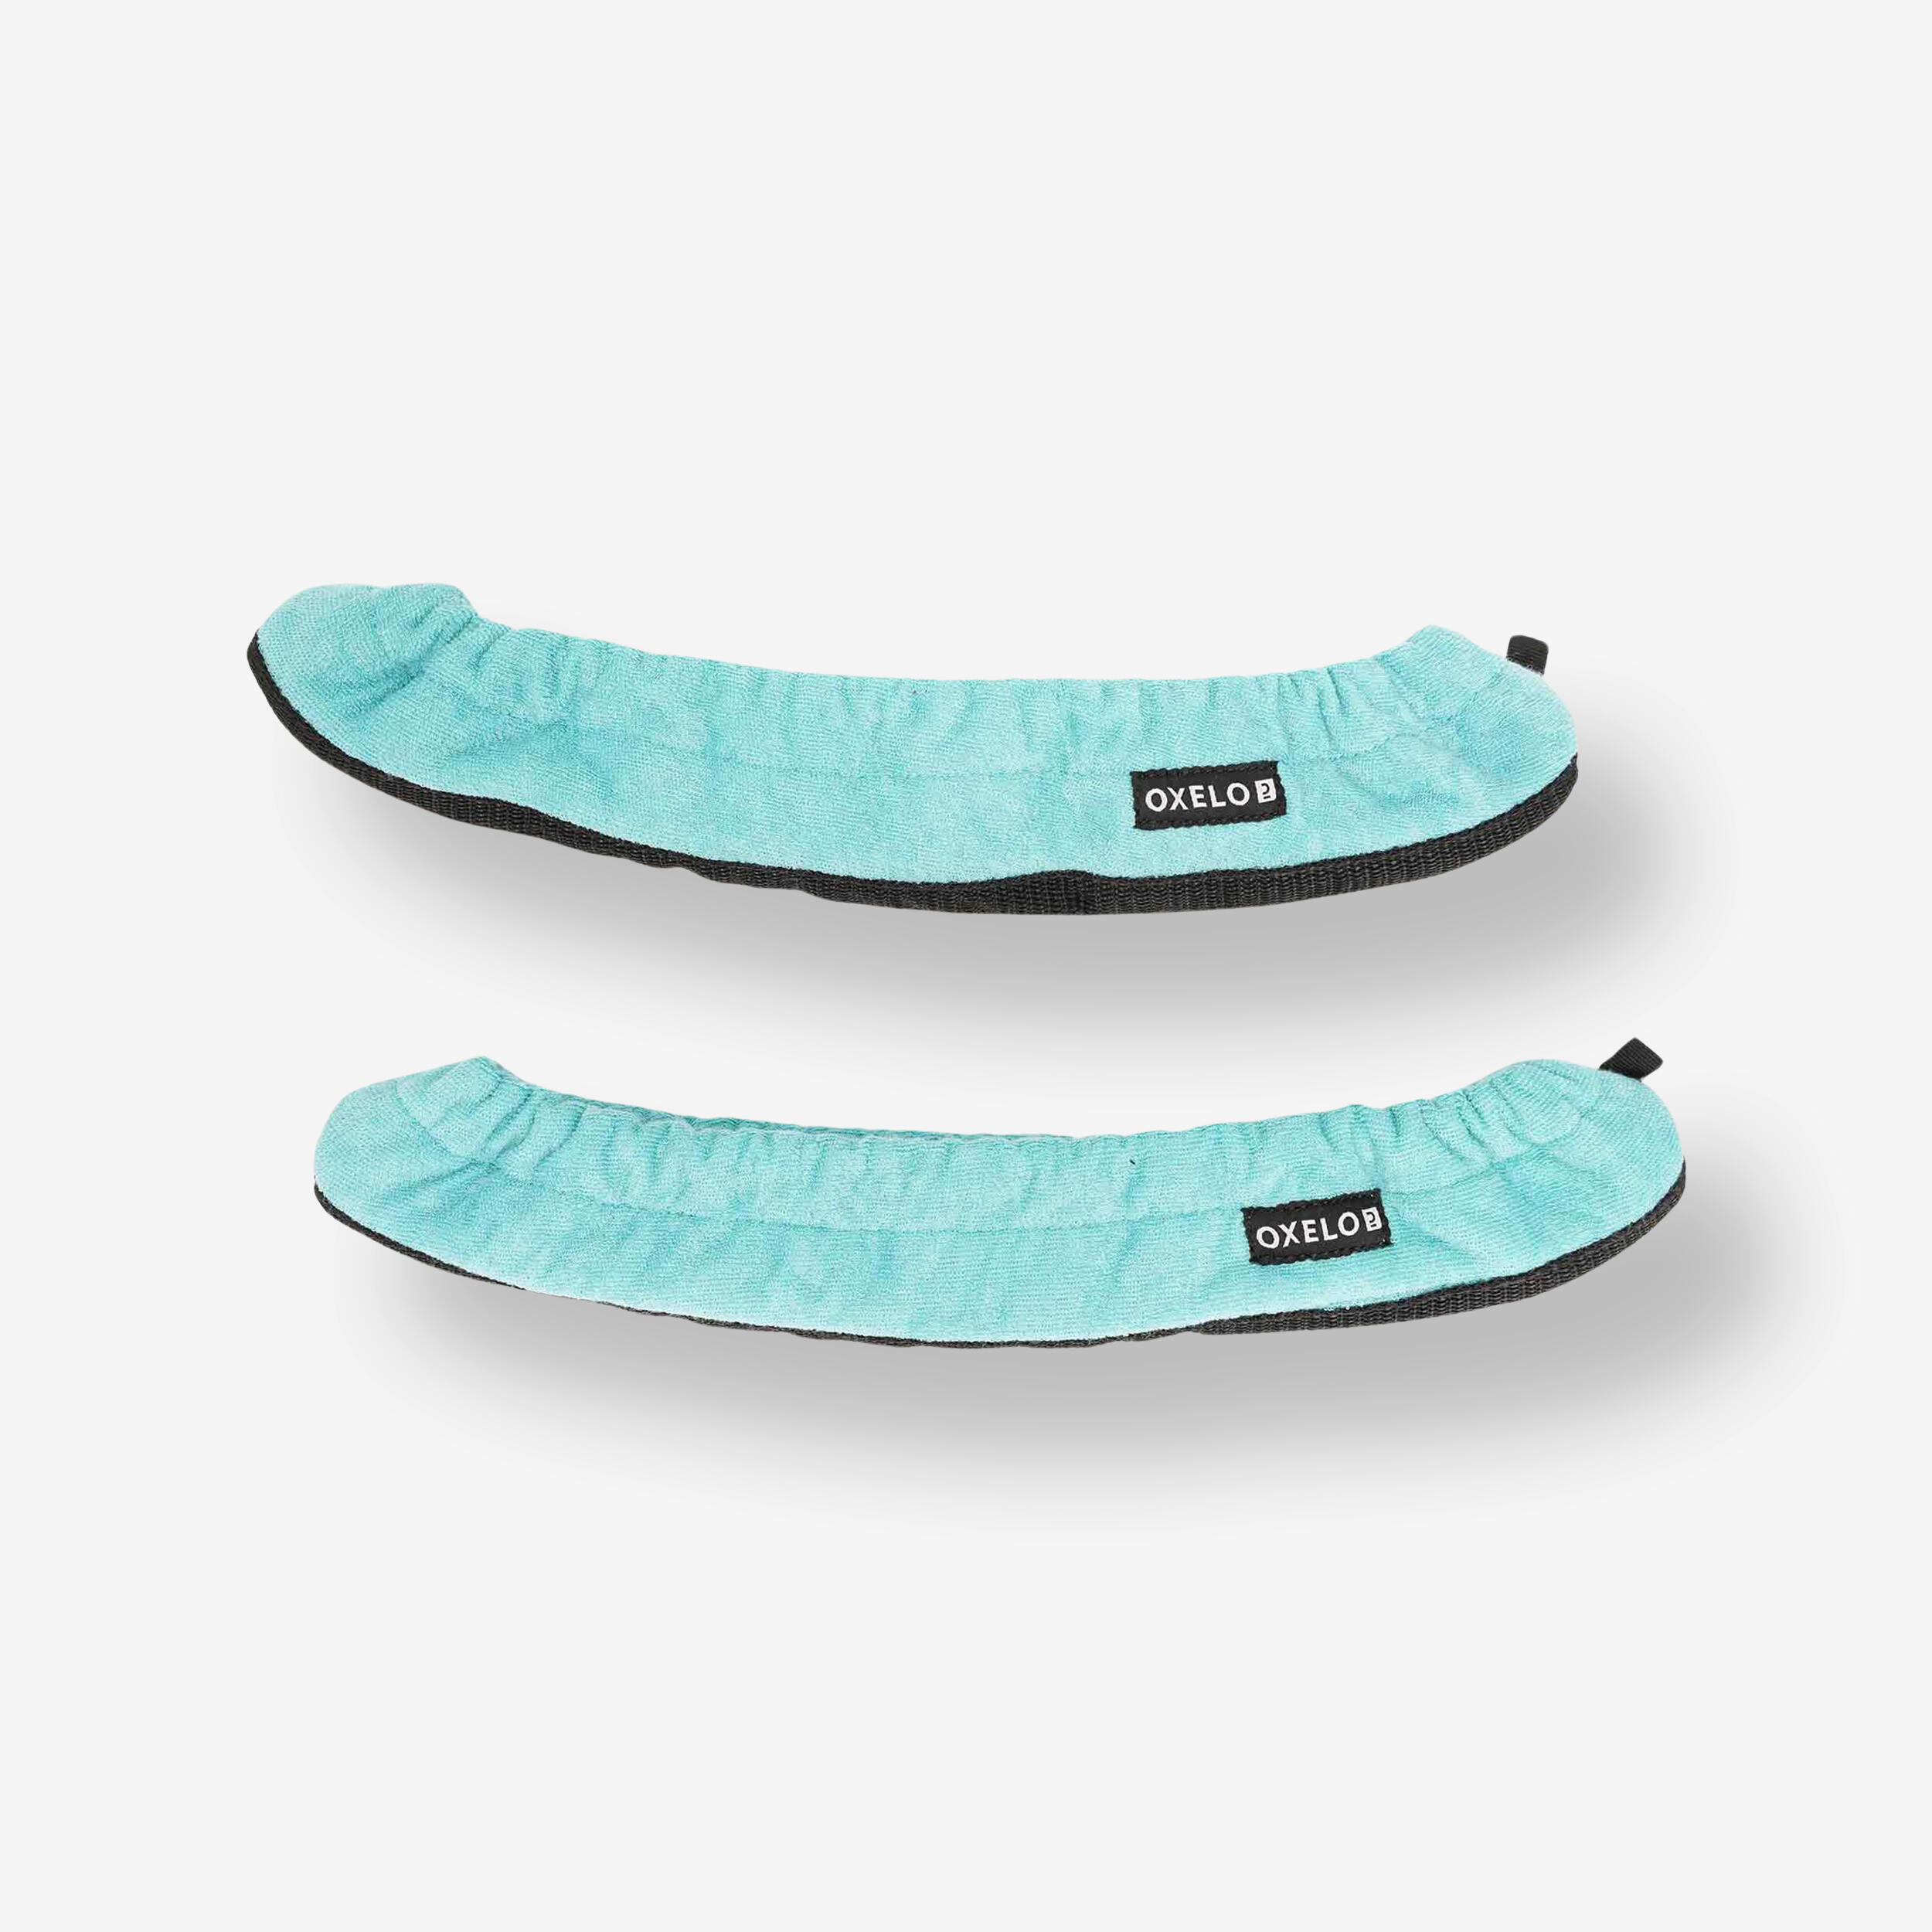 OXELO Ice Skate Blade Cover - Turquoise